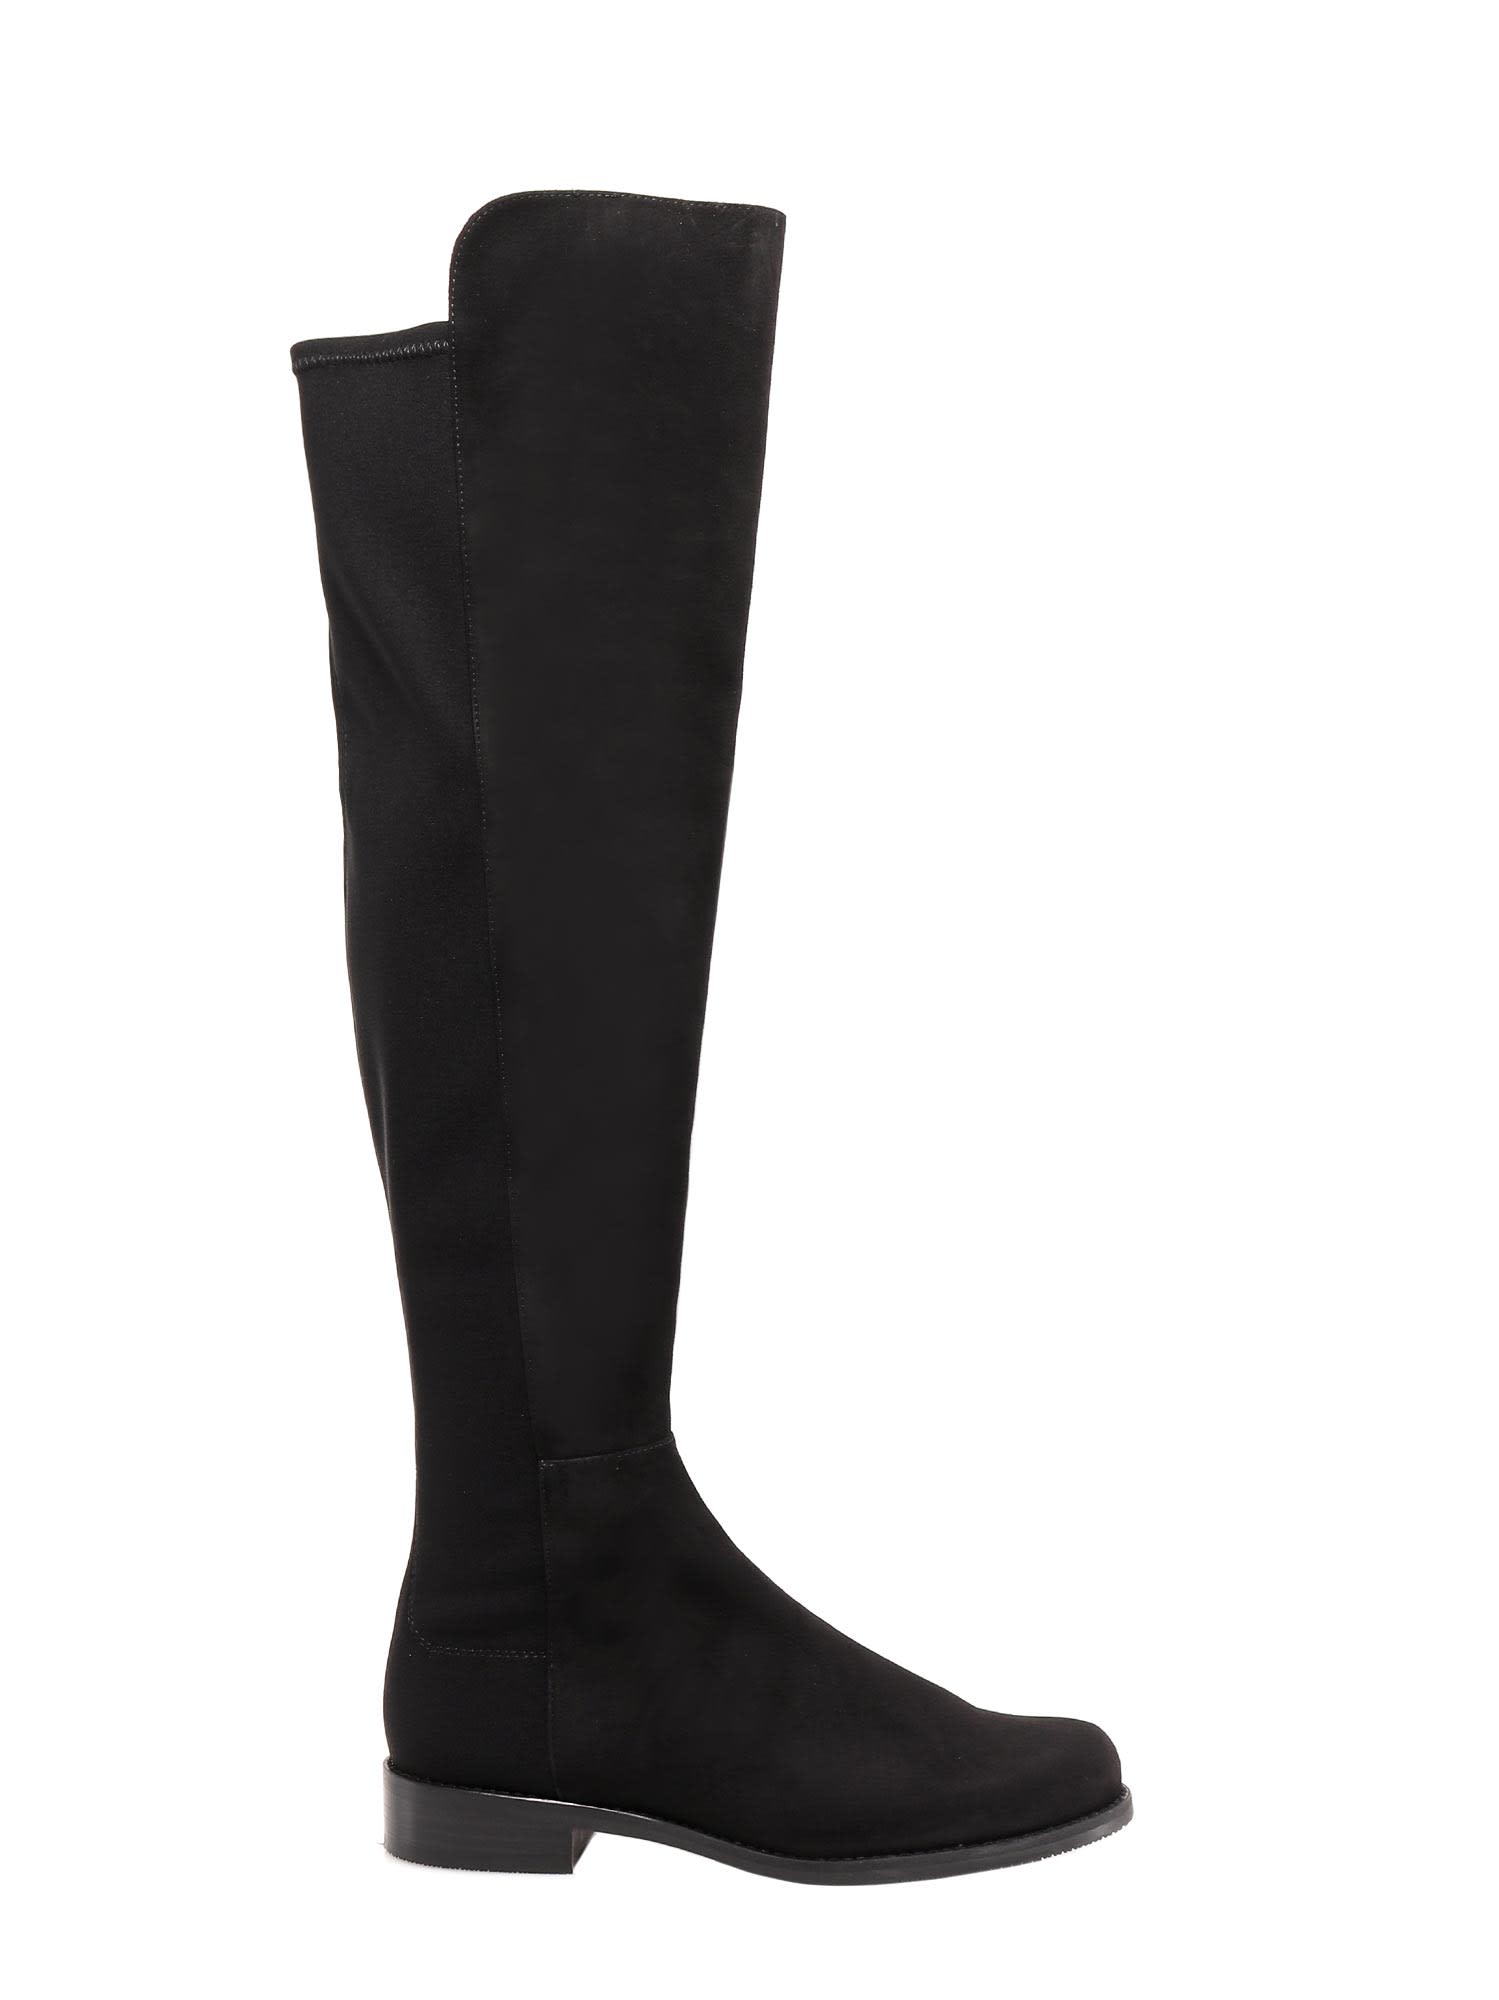 Buy Stuart Weitzman Slip-on Over-the-knee Boots online, shop Stuart Weitzman shoes with free shipping